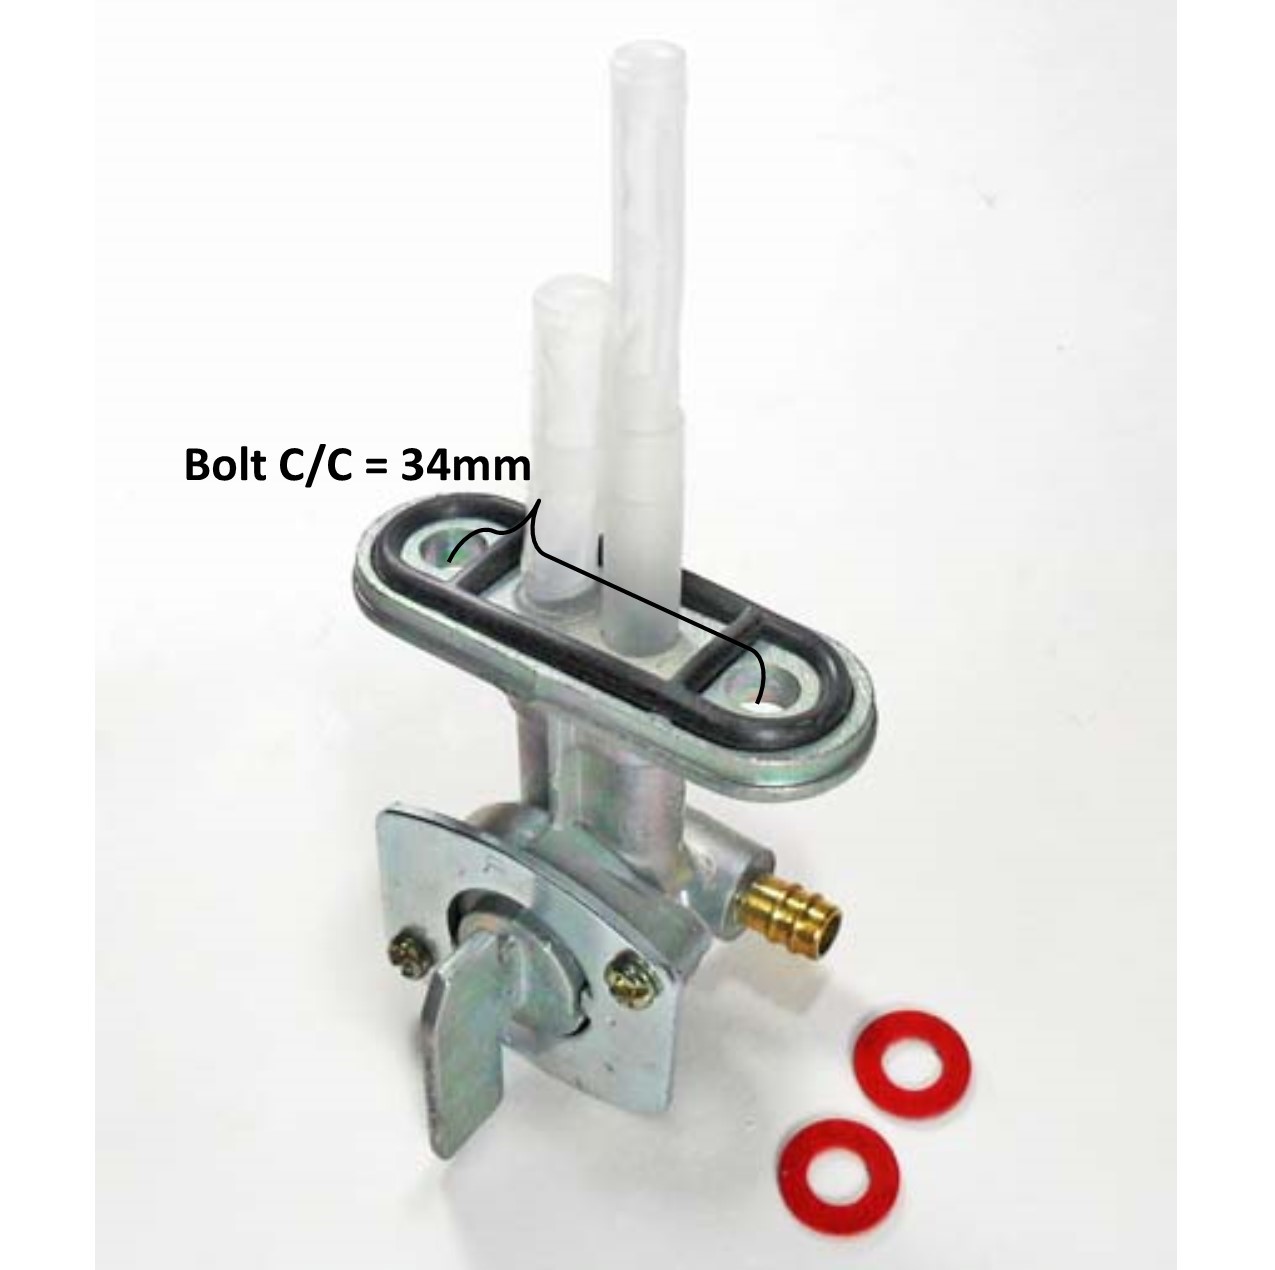 Fuel Valve 3/16" Fits Many Japanese & Chinese ATVs Bolts c/c= 34mm - Click Image to Close